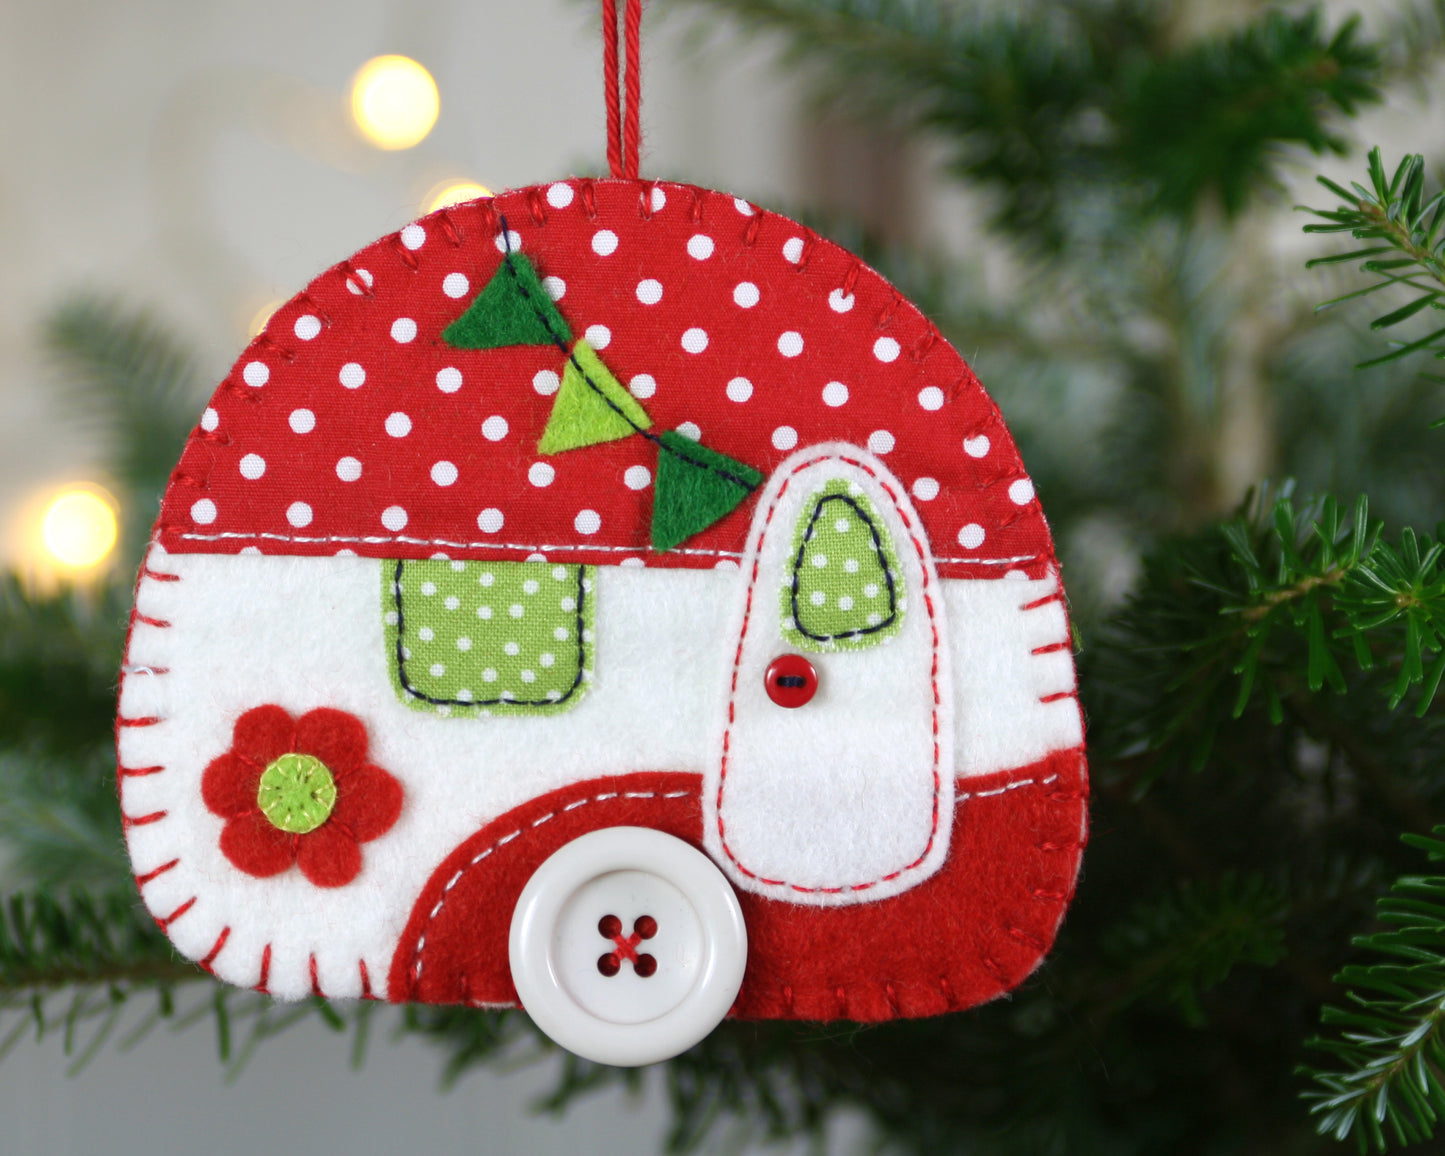 Large camper Christmas ornament in red and white